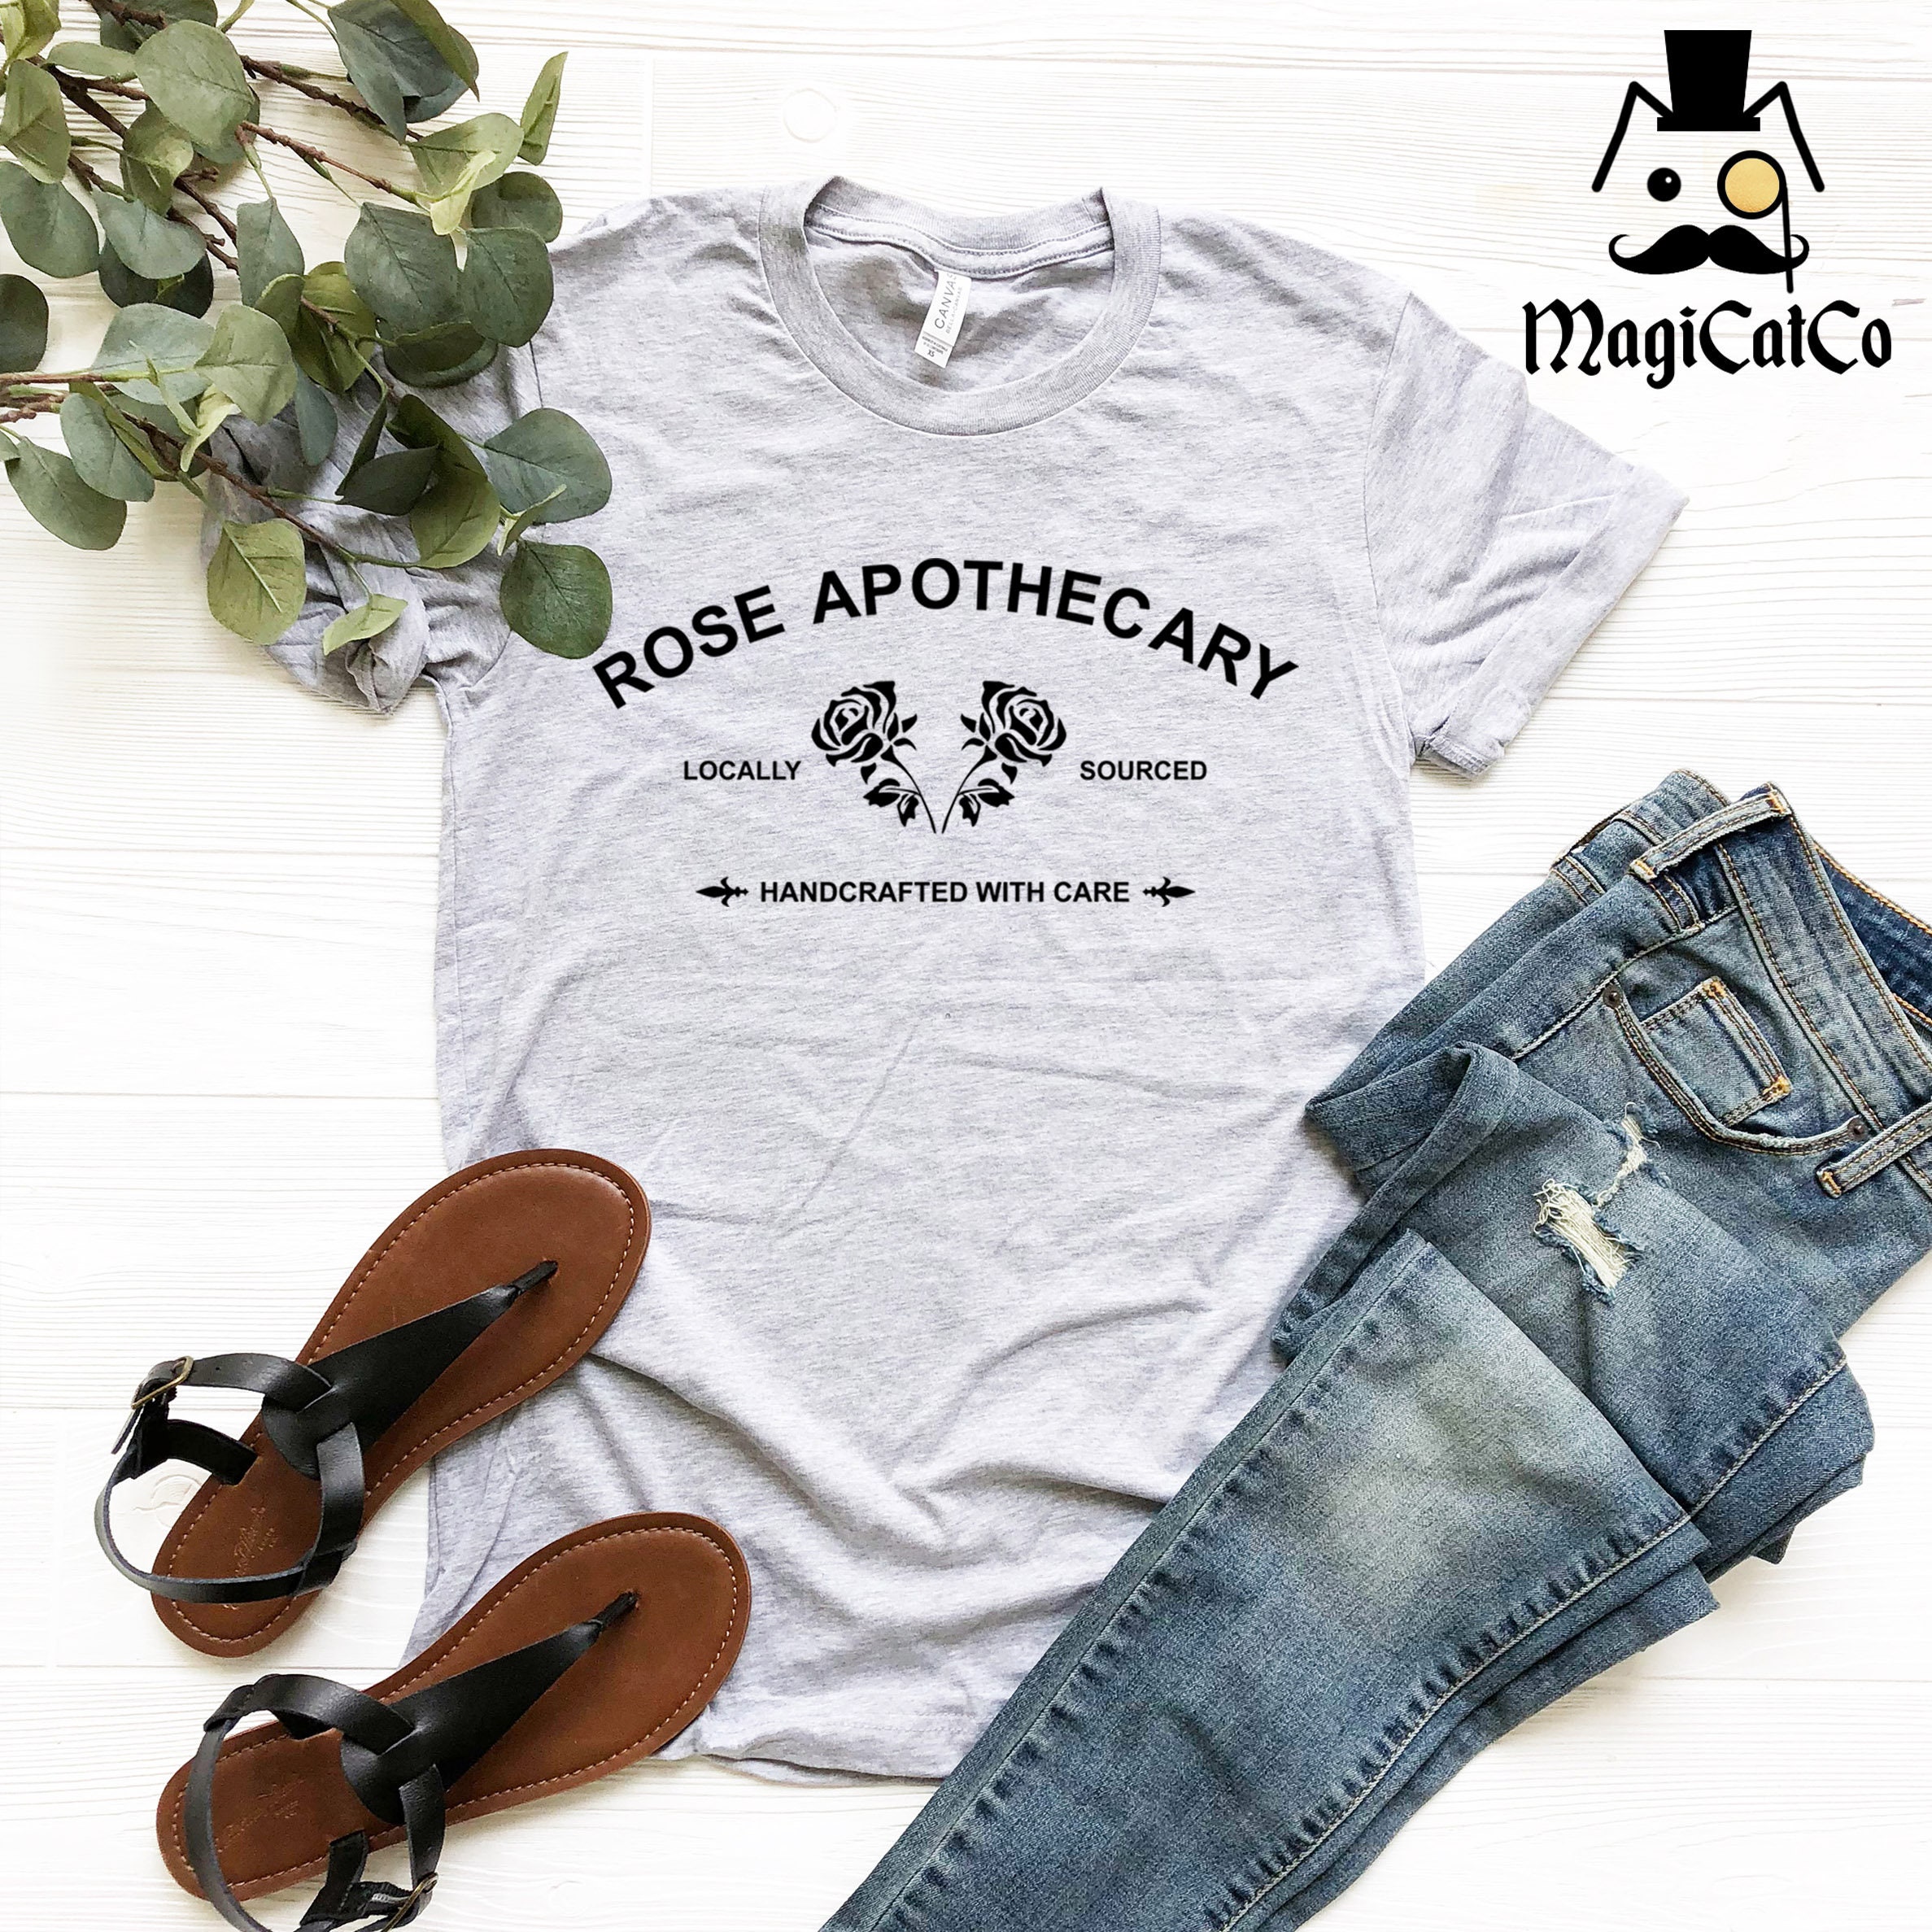 Rose Apothecary Shirt Adult T Shirts Locally Sourced Hand | Etsy